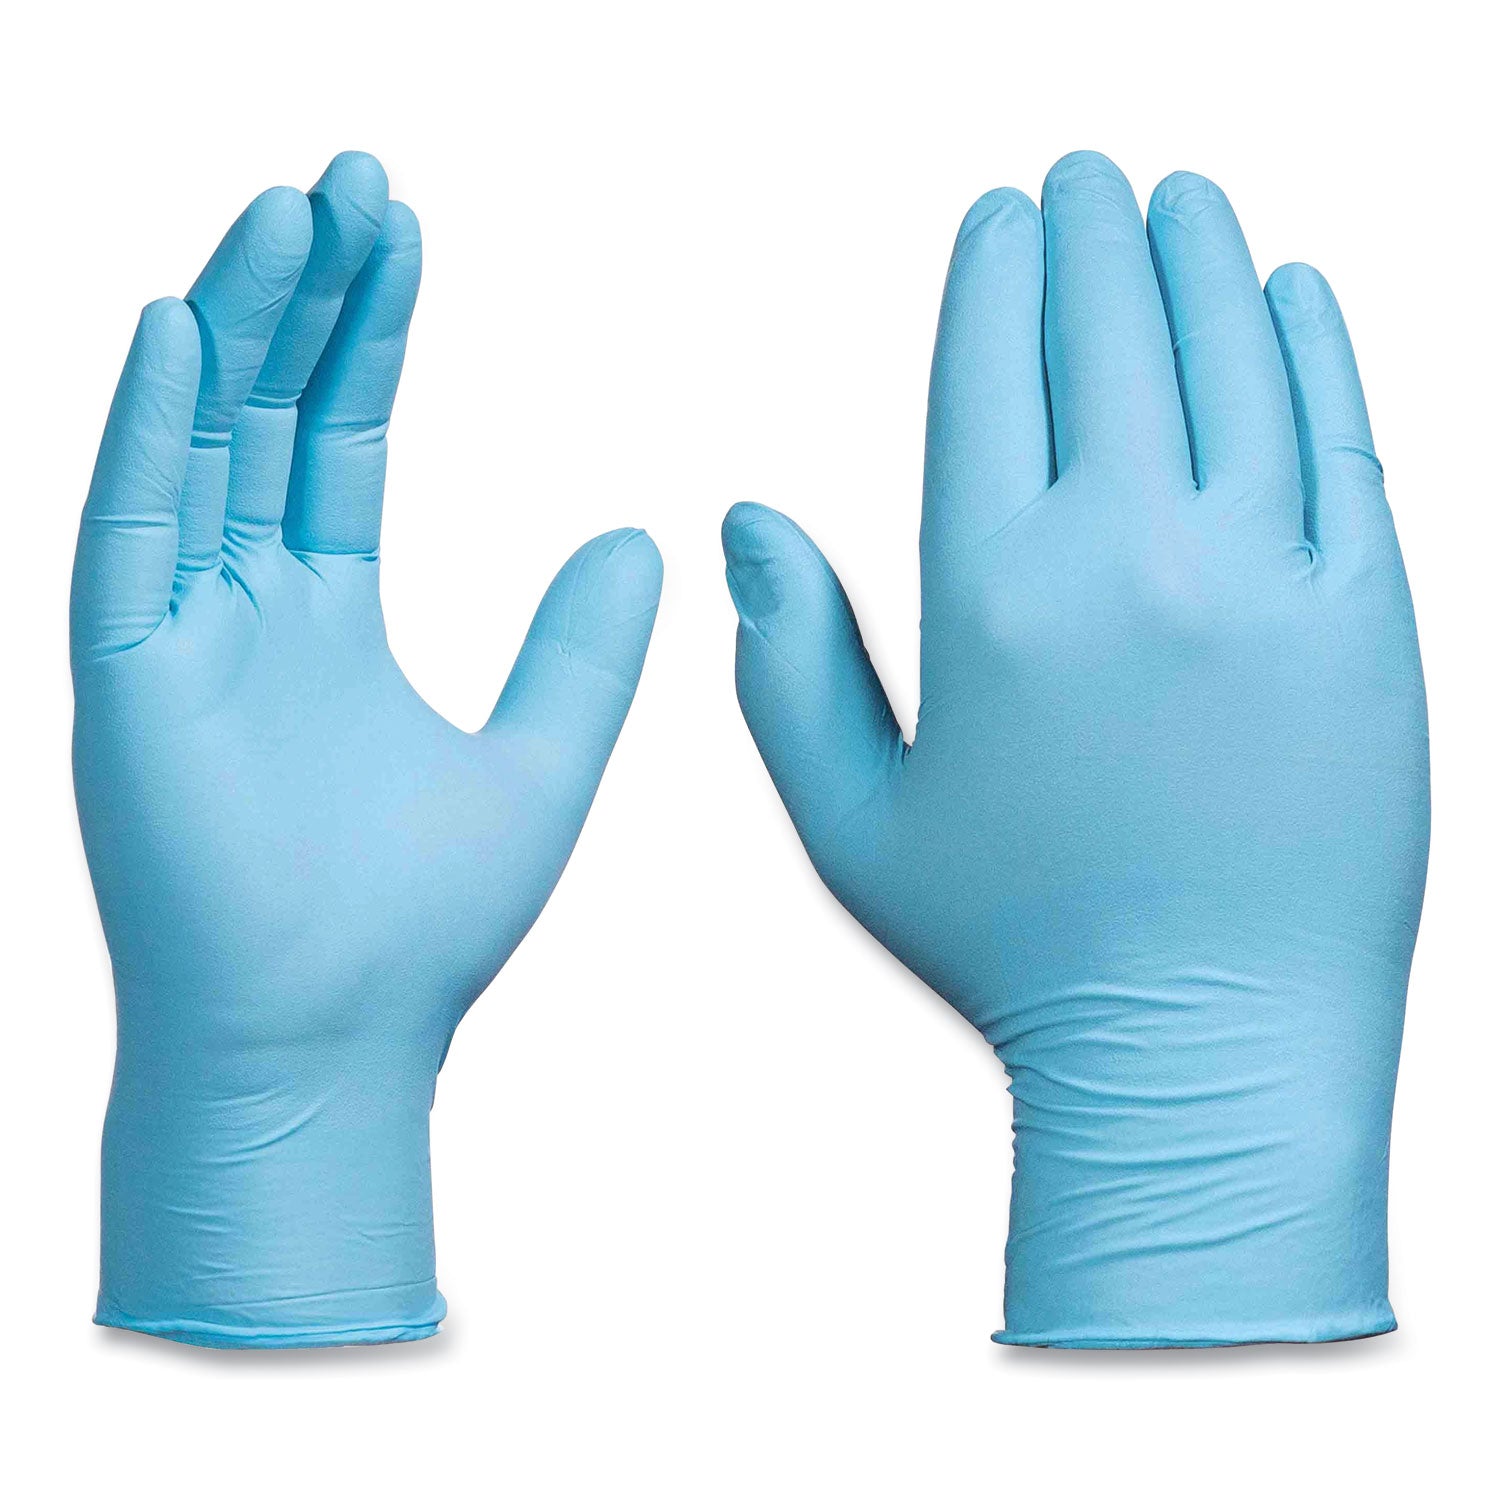 industrial-nitrile-gloves-powder-free-5-mil-small-blue-100-gloves-box-10-boxes-carton_axcinpf42100 - 7